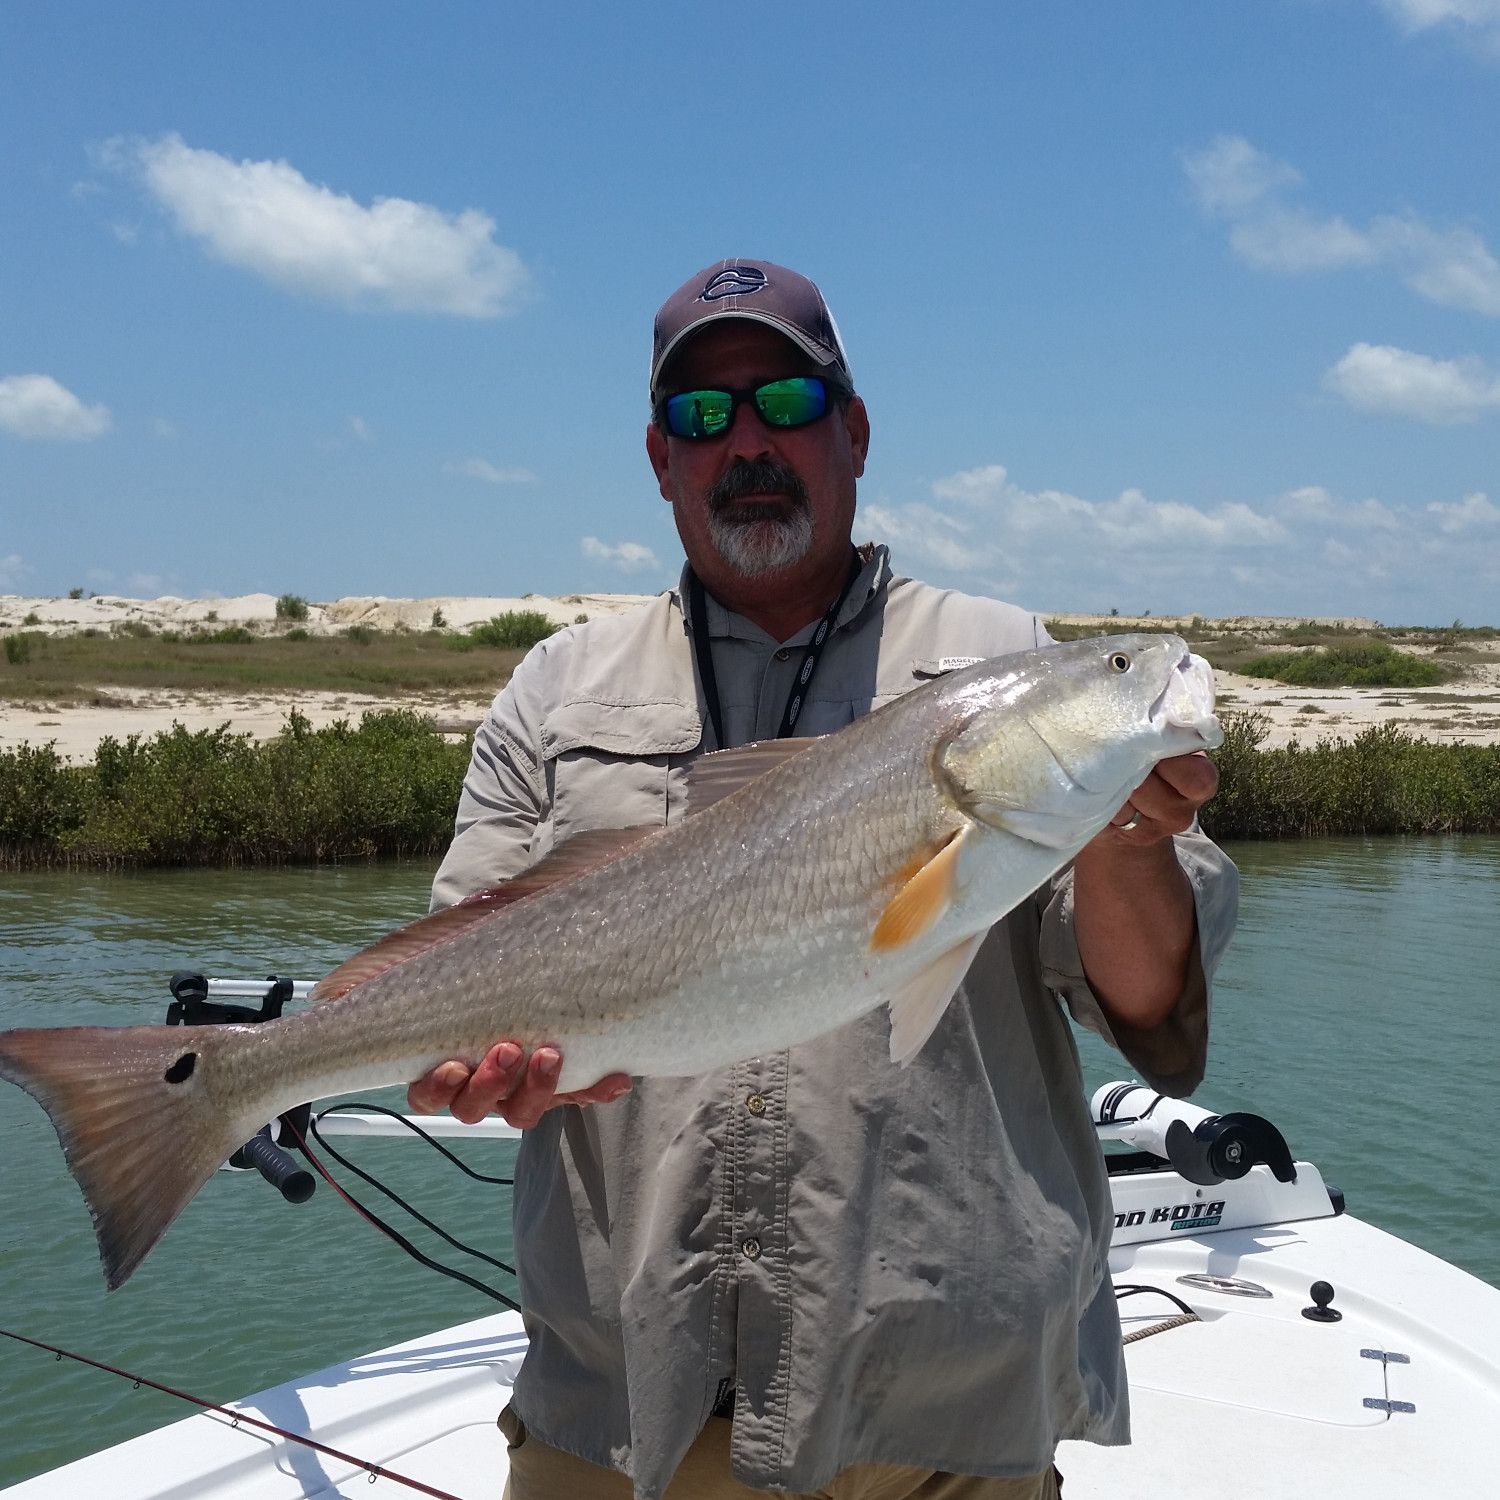 Just one of many redfish caught on this outing. Fish was released